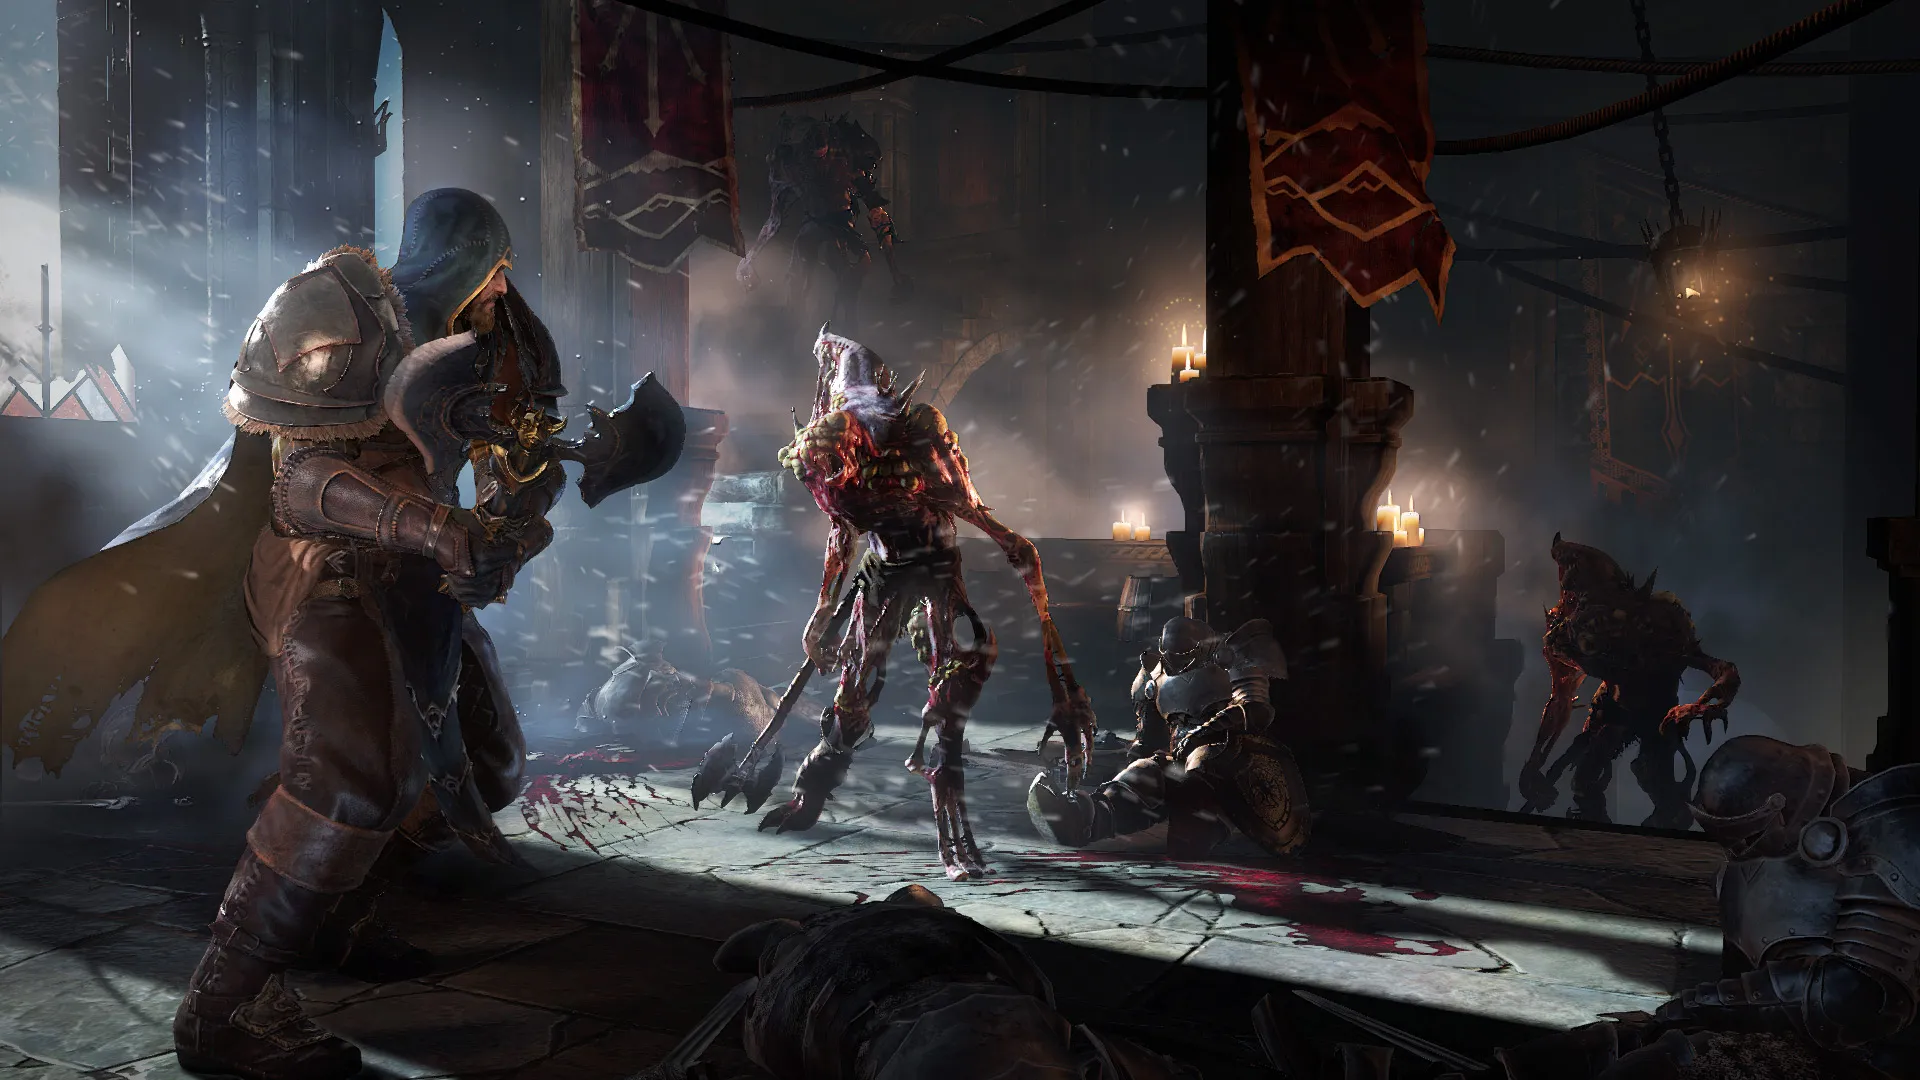 The Lords of the Fallen revives a long-dead Soulslike sequel